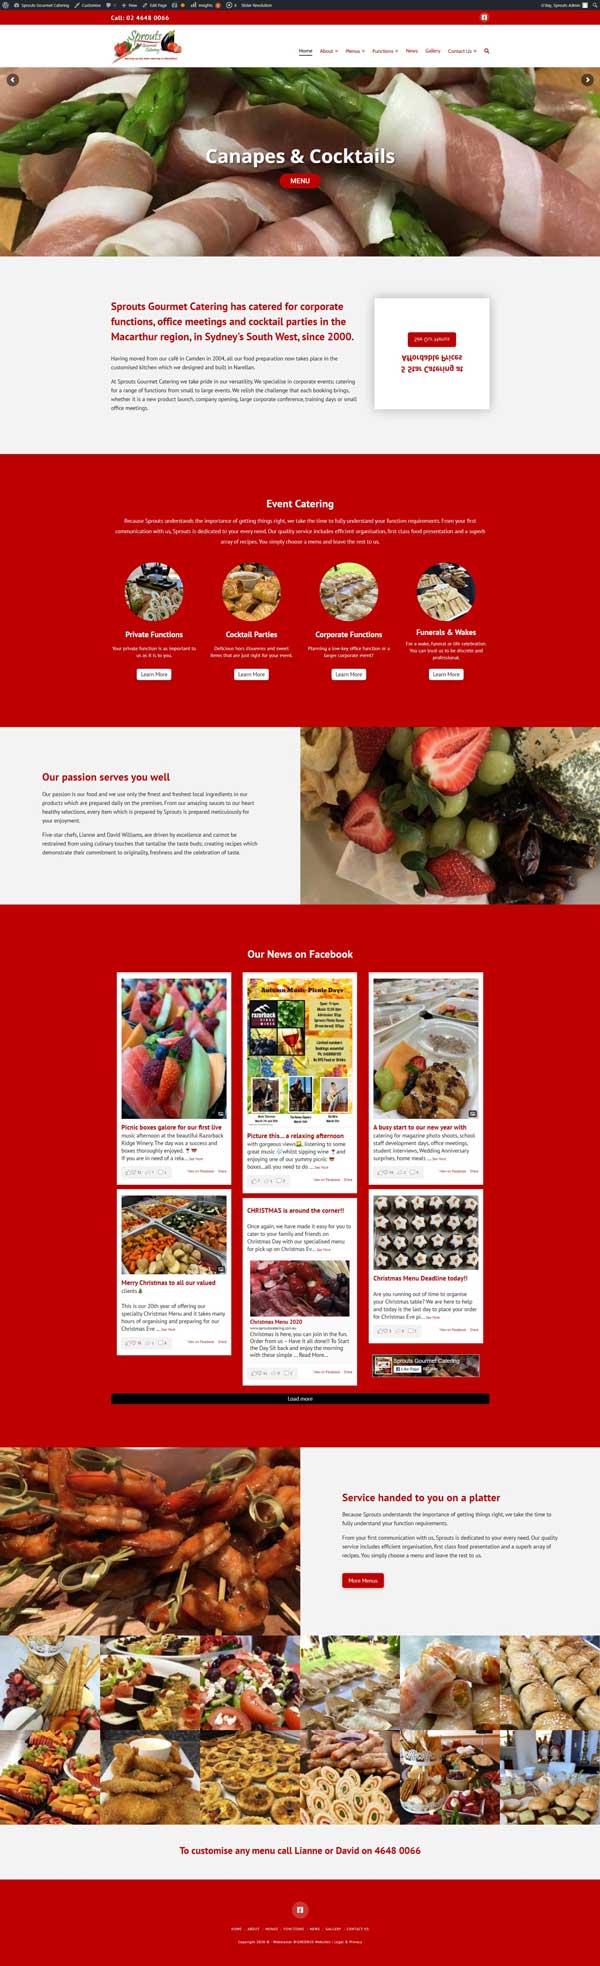 Sprouts Gourmet Catering website designed by Big Red Bus Websites - ezample 1